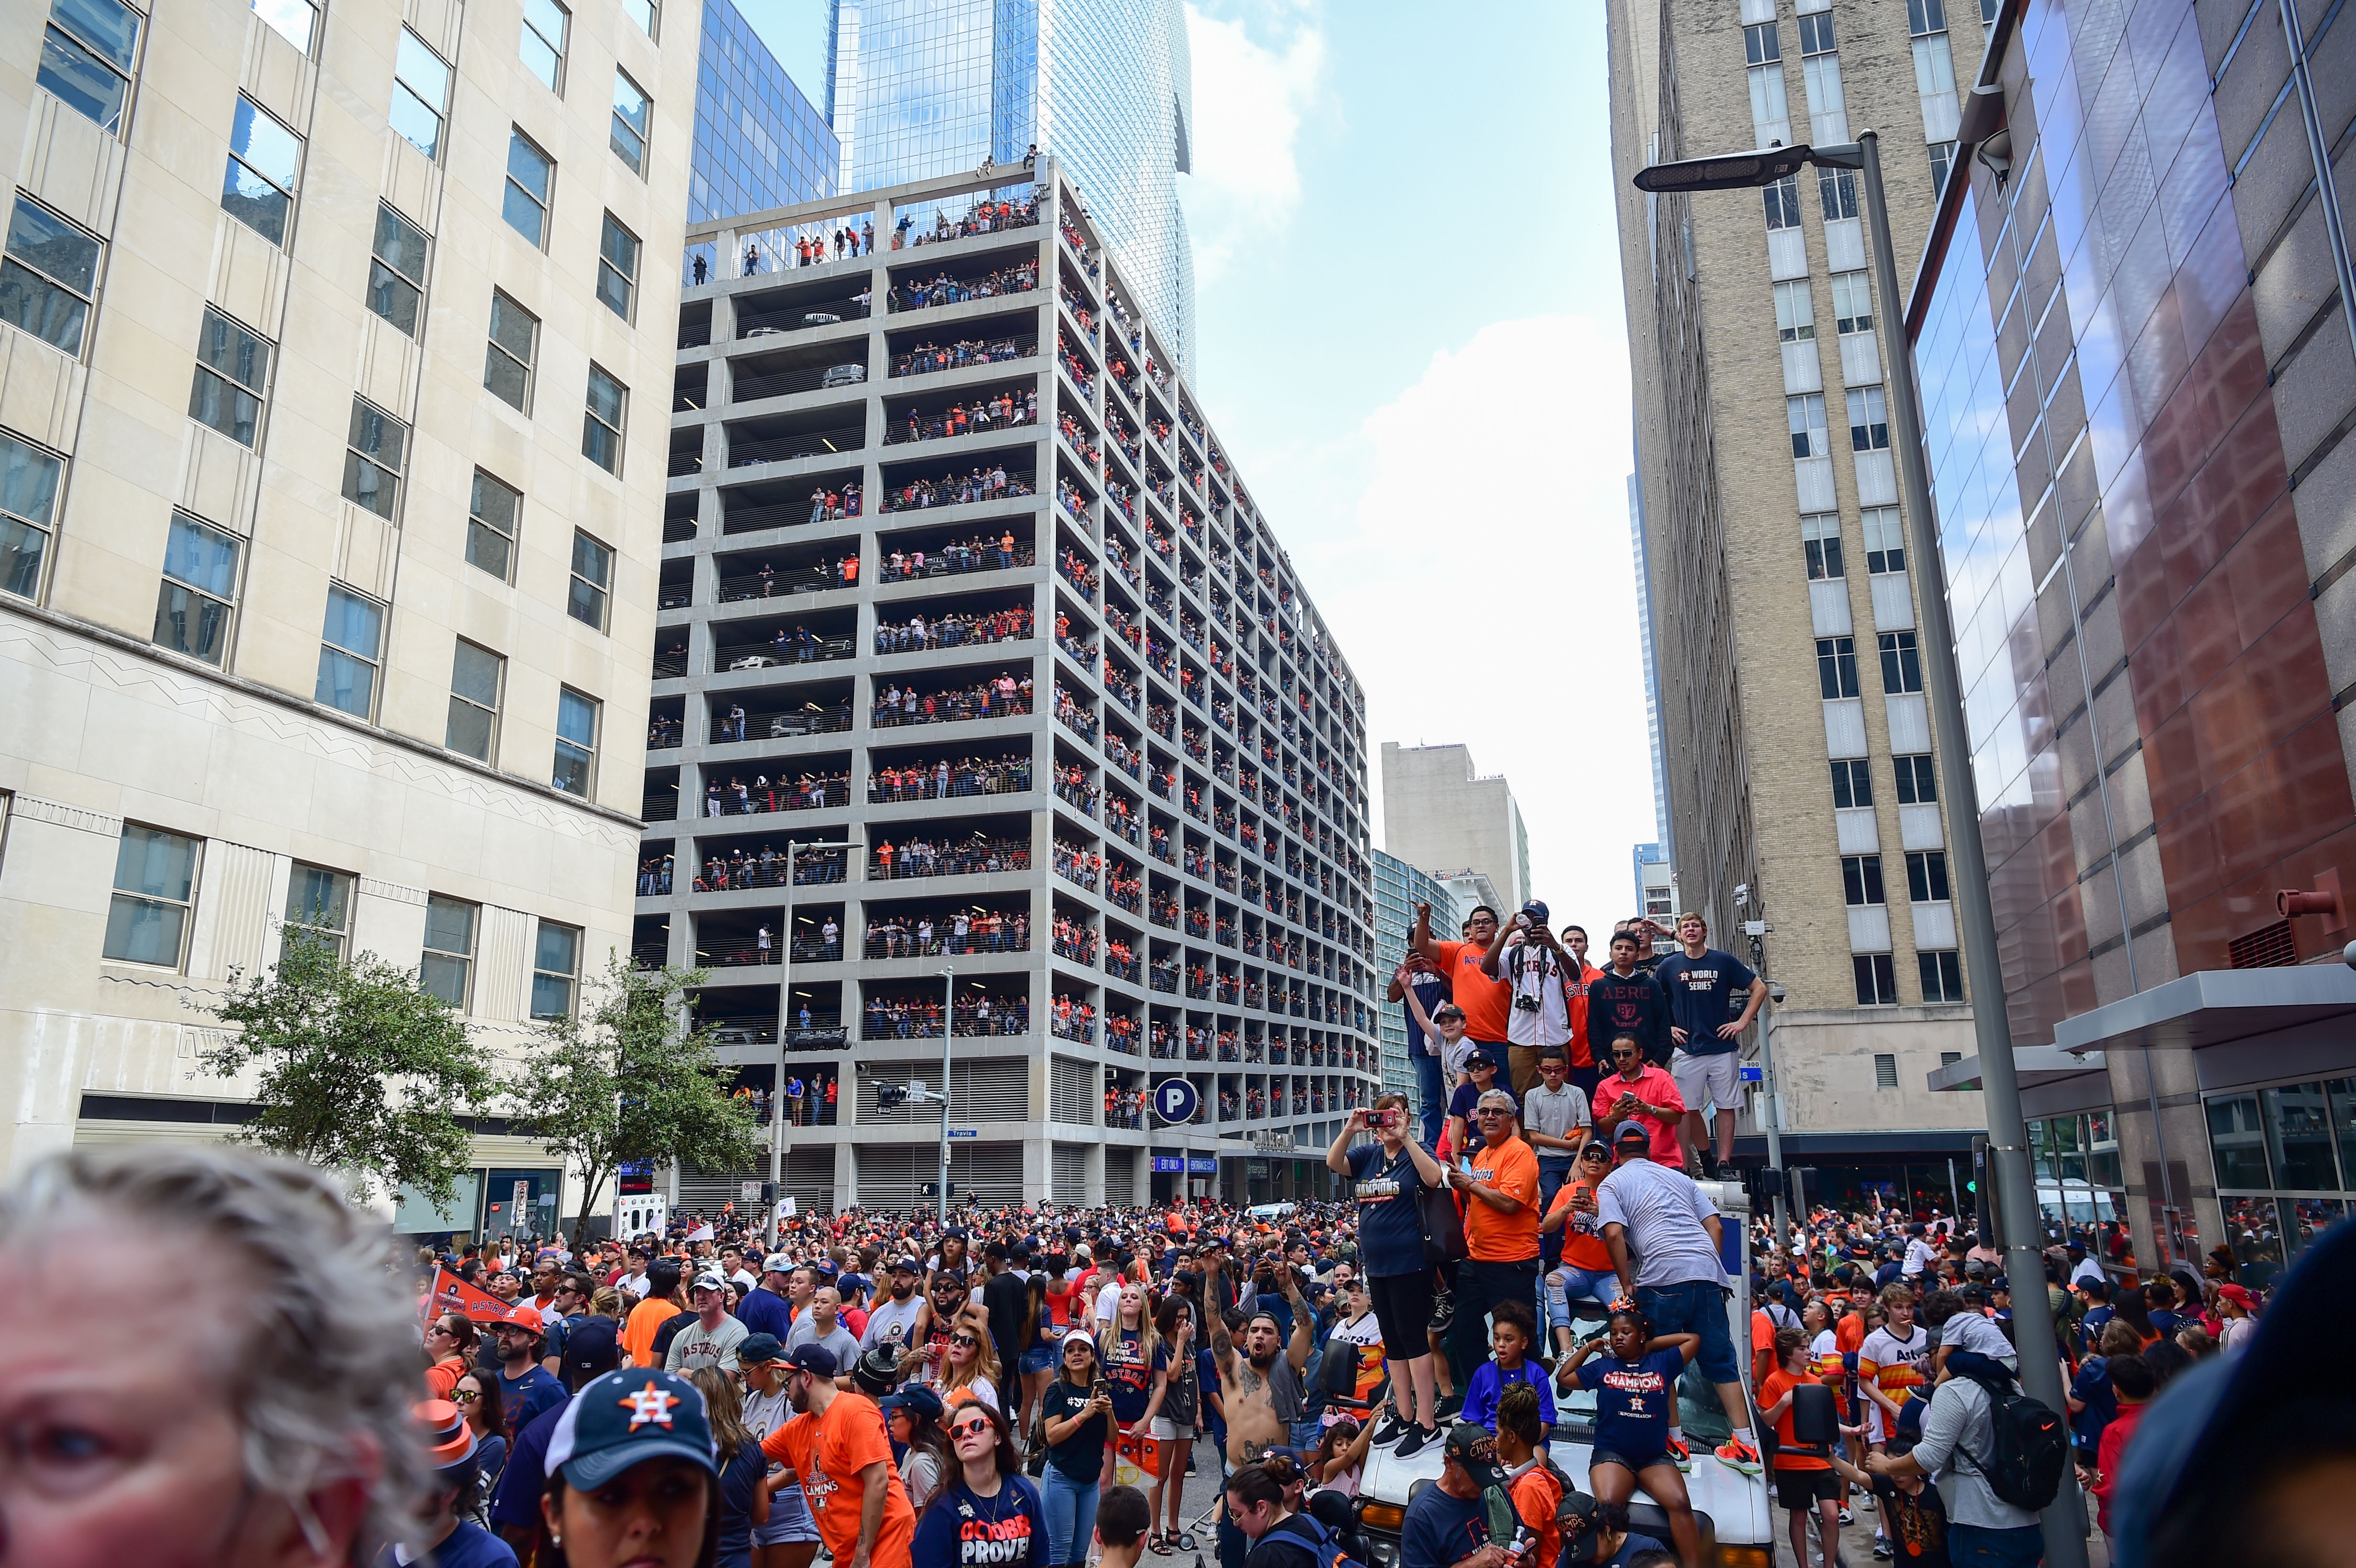 Best moments from Astros championship parade - ABC13 Houston